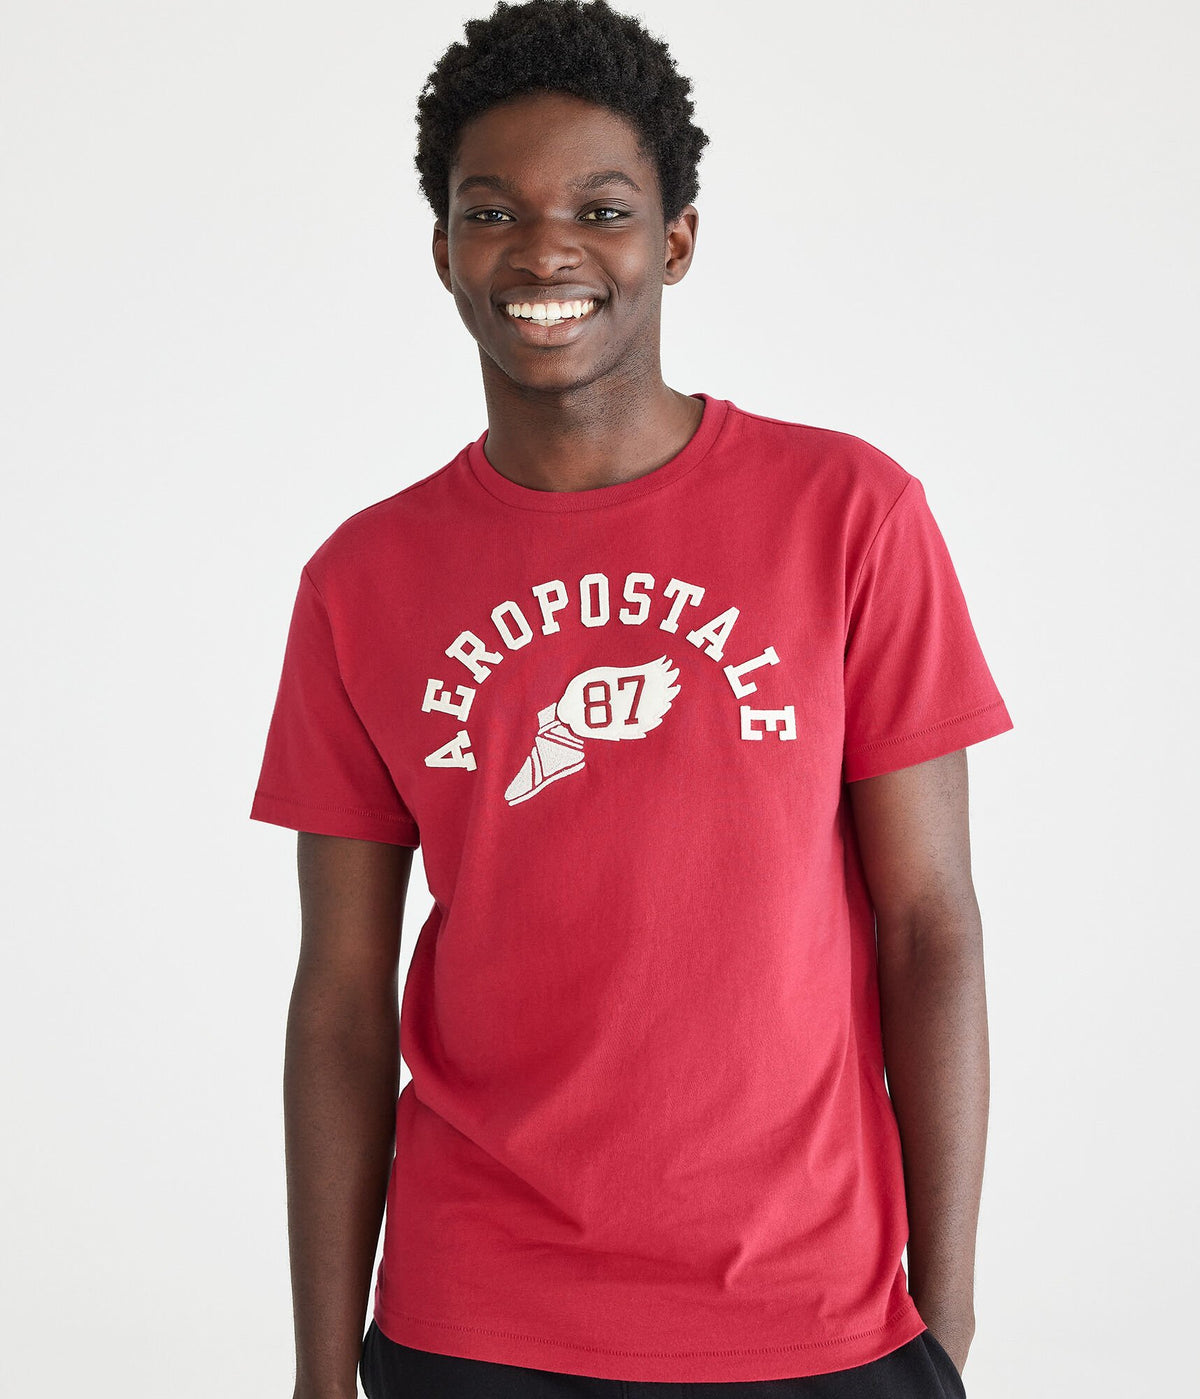 Aeropostale Mens' Aeropostale 87 Winged Foot Graphic Tee - Red - Size 3XL - Cotton - Teen Fashion & Clothing Cerise Red